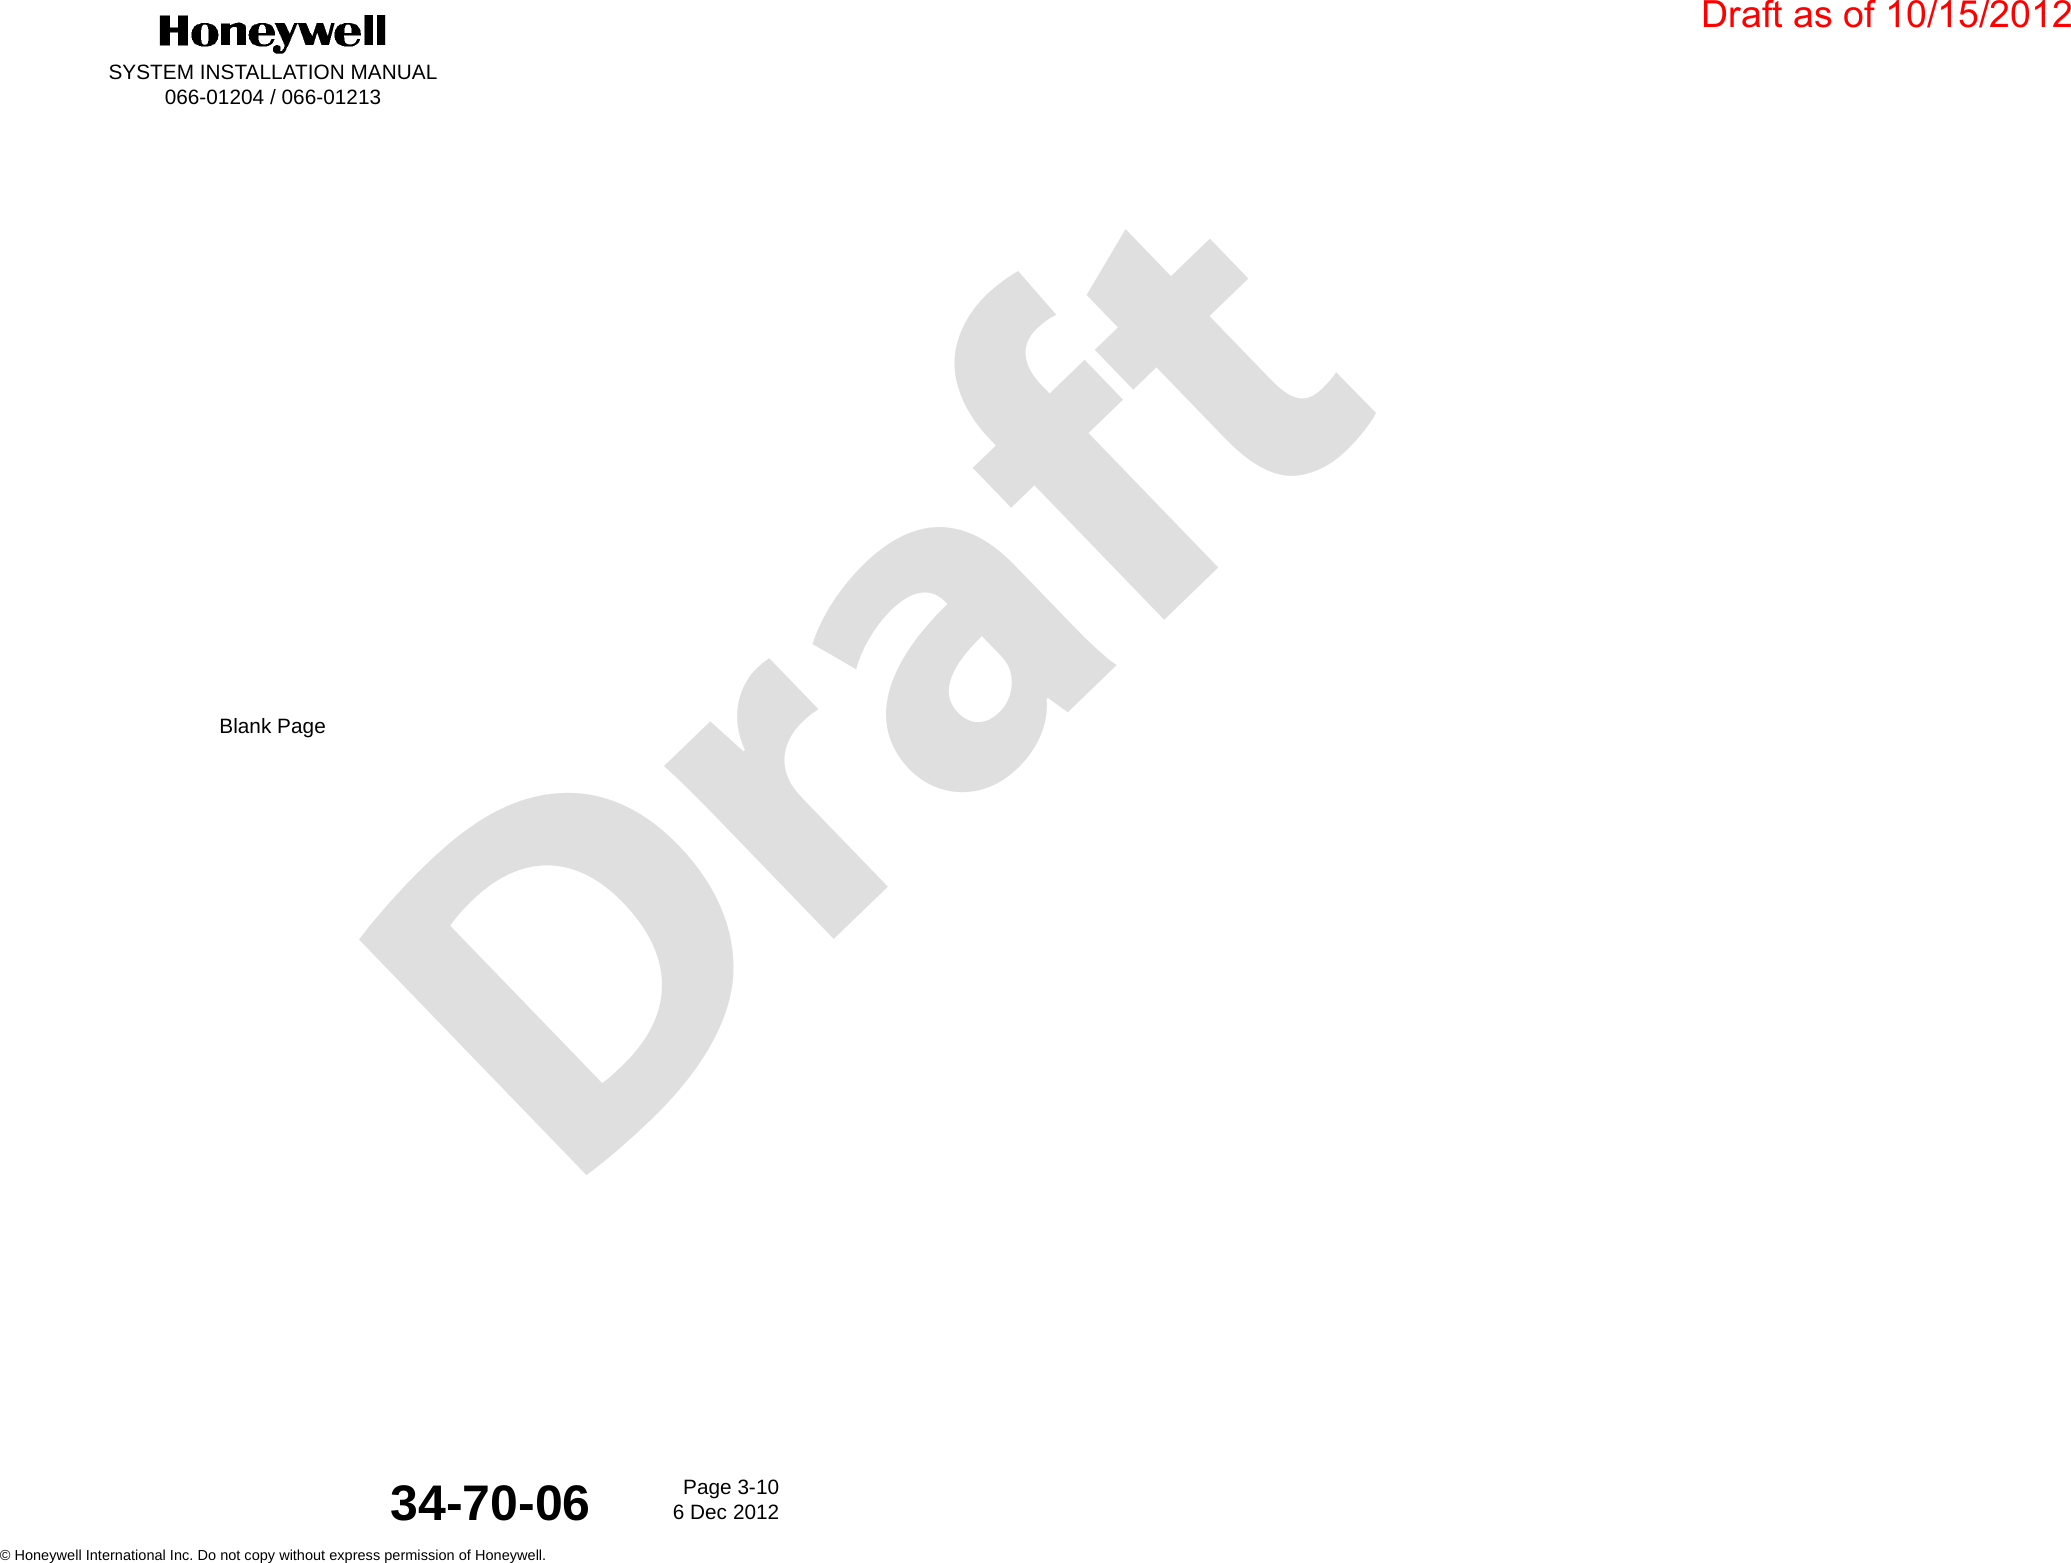 DraftSYSTEM INSTALLATION MANUAL066-01204 / 066-01213Page 3-106 Dec 2012© Honeywell International Inc. Do not copy without express permission of Honeywell.34-70-06Blank PageDraft as of 10/15/2012